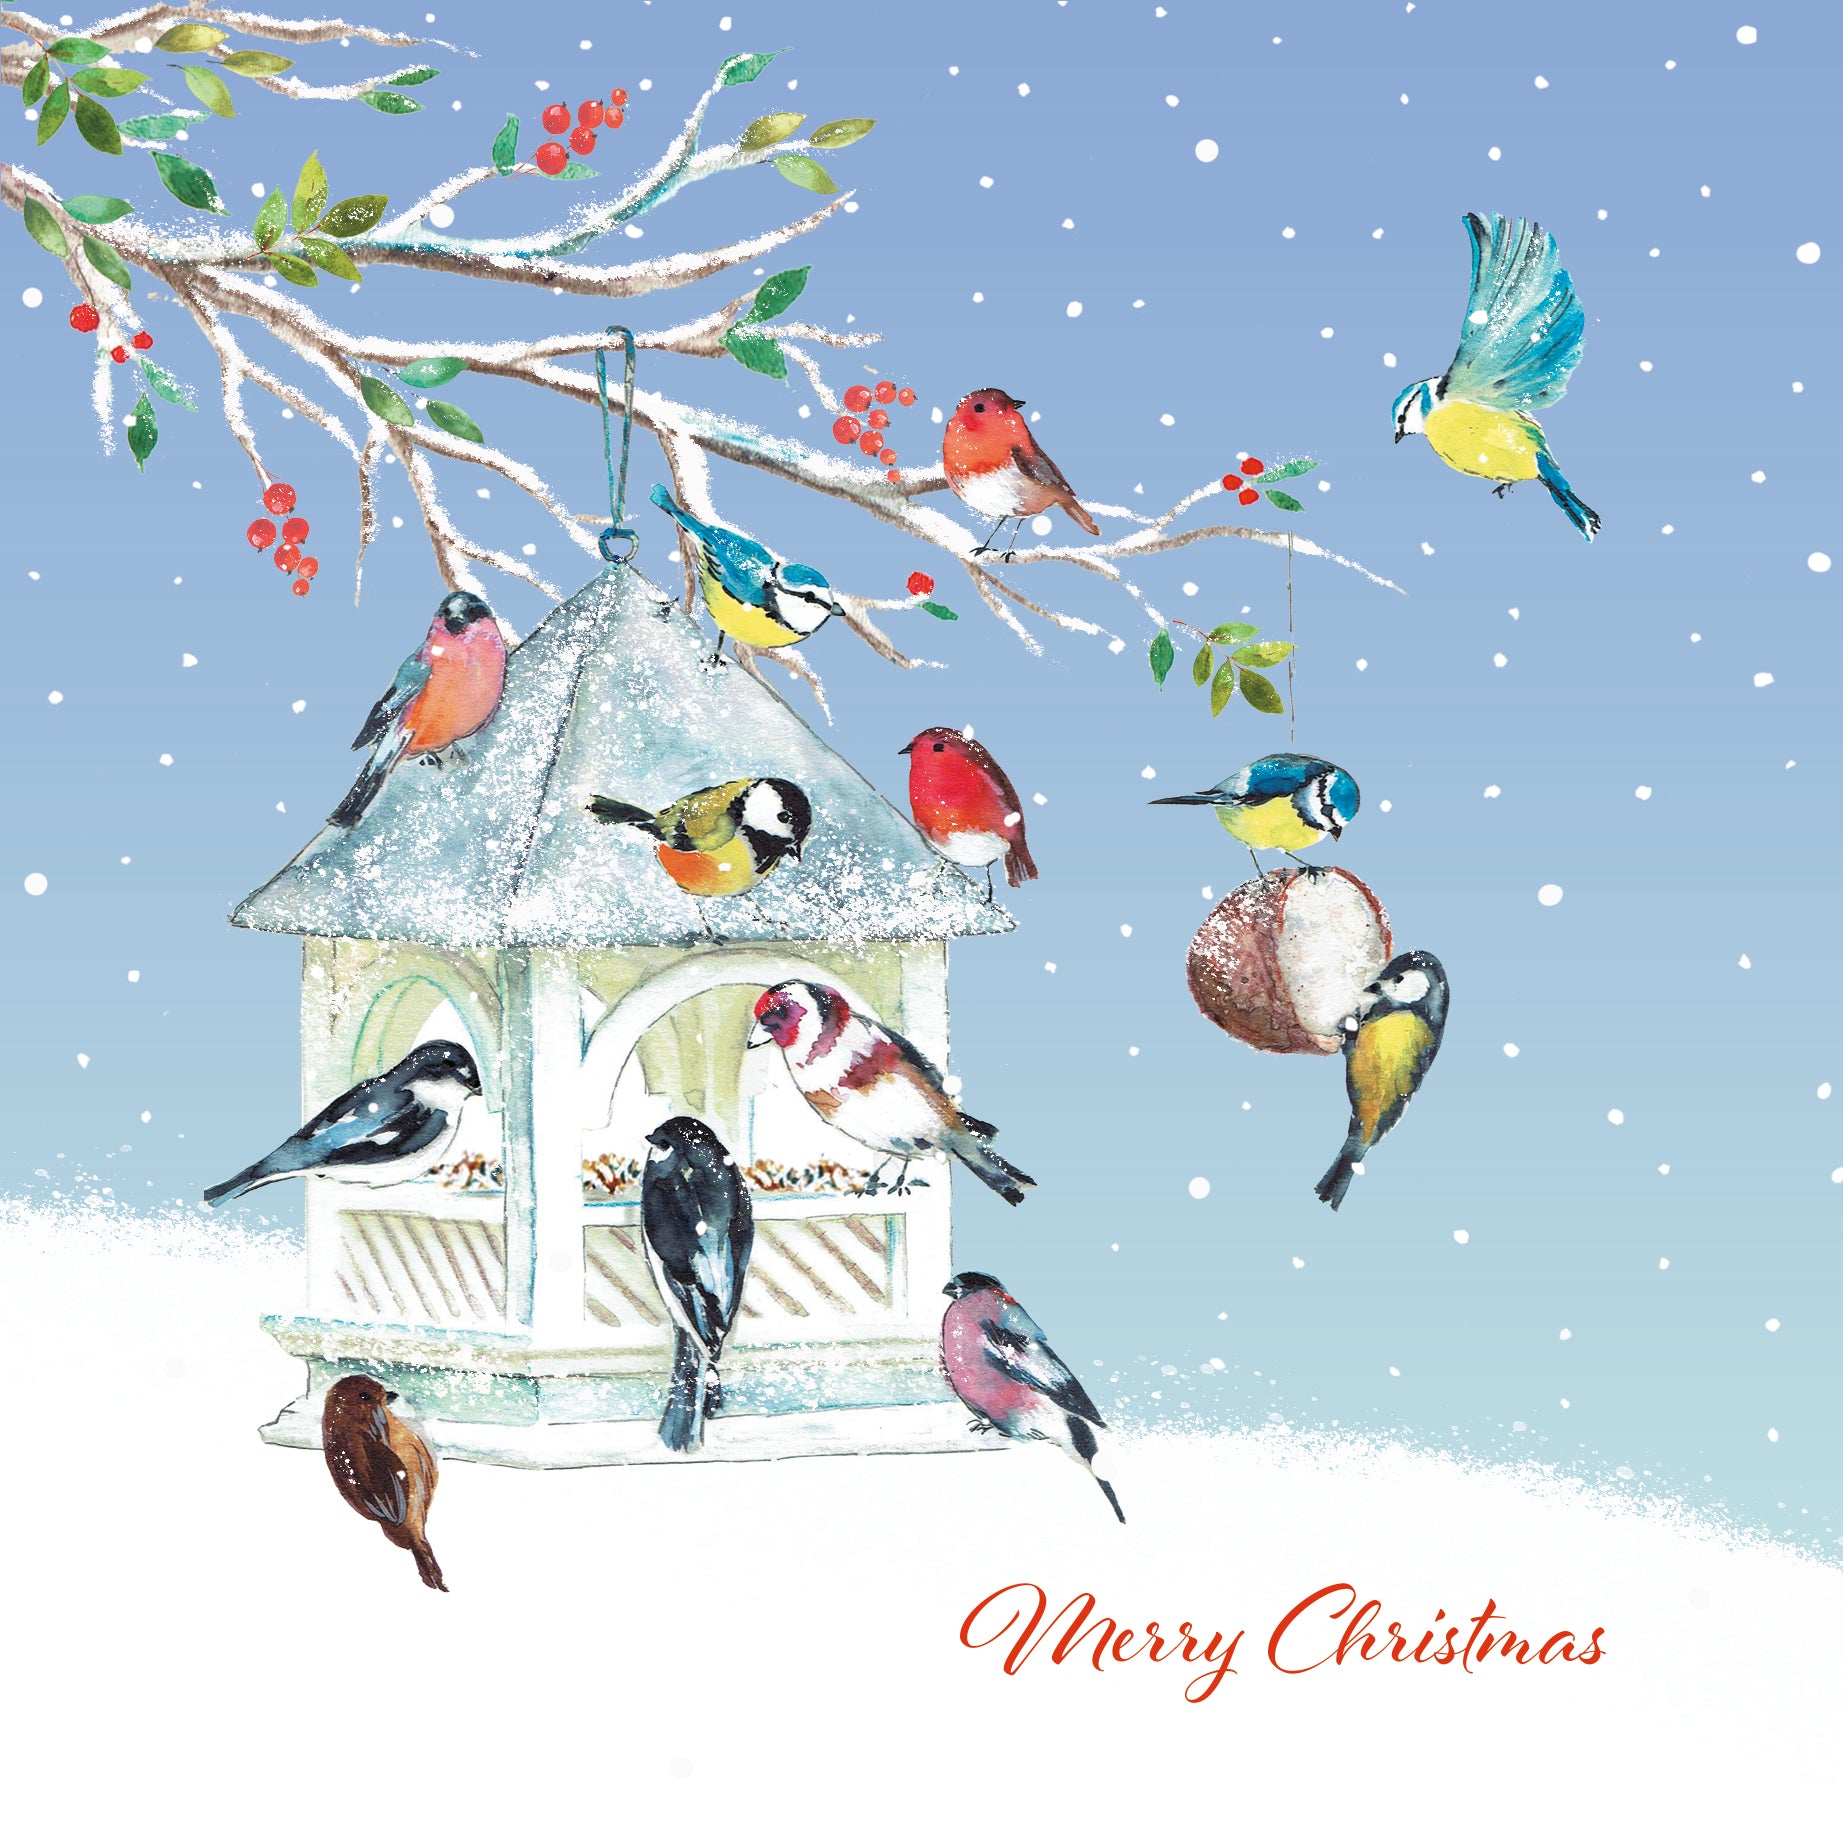 This christmas card design shows a number of different coloured birds eating from a bird feeder hanging on a tree branch and reads Merry Christmas in the bottom right hand corner.